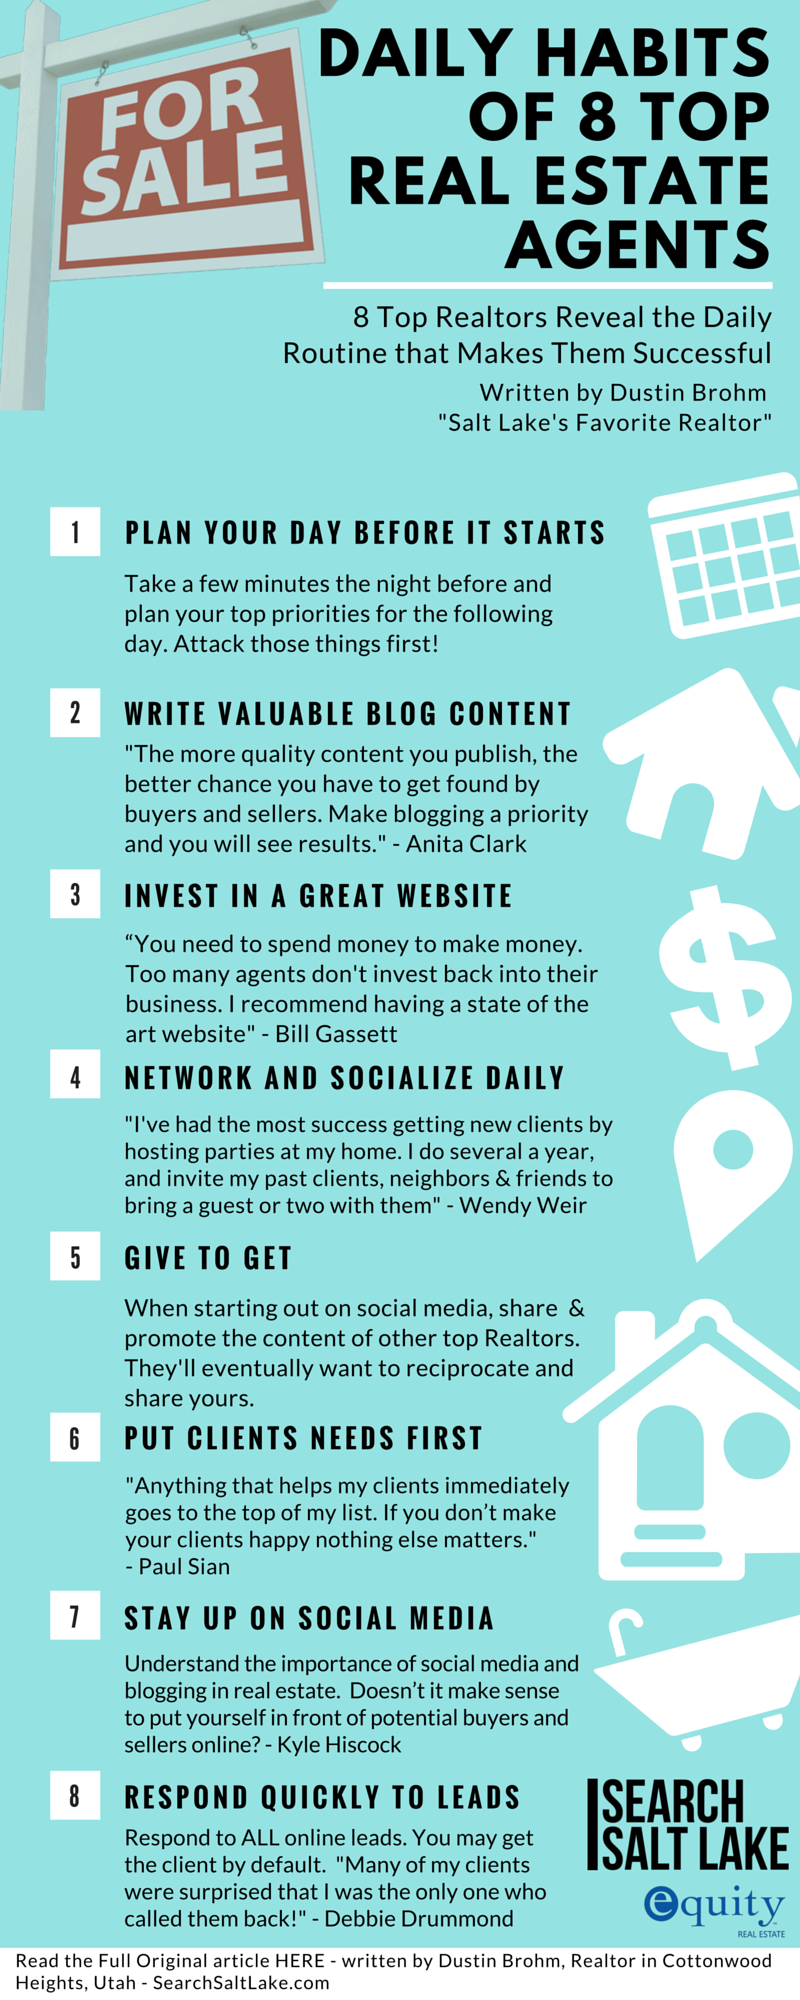 Daily Habits of 8 Top Real Estate Agents